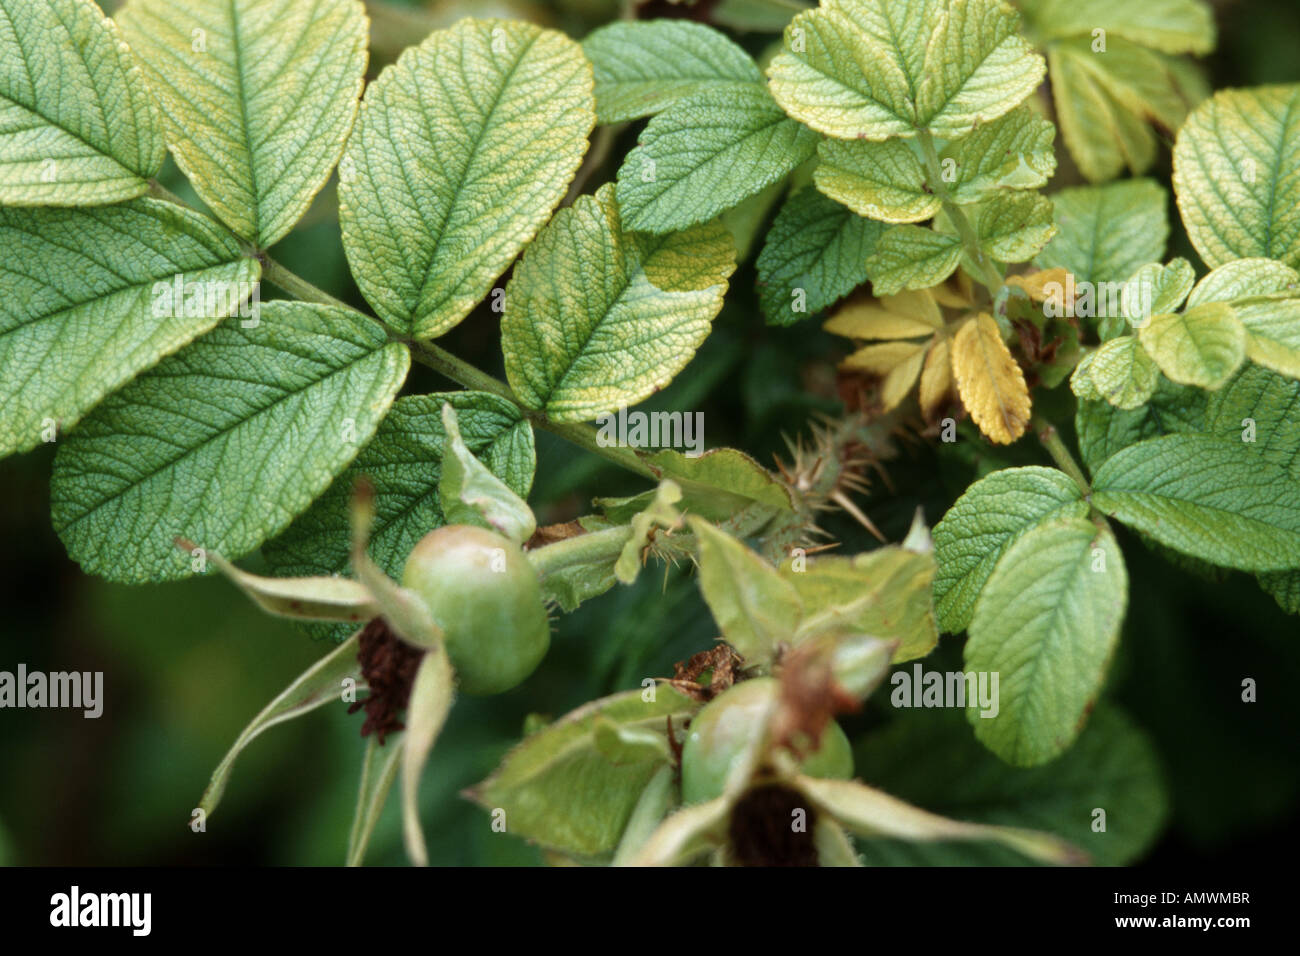 rugosa rose, Japanese rose (Rosa rugosa), with chlorosis caused by iron deficiency Stock Photo